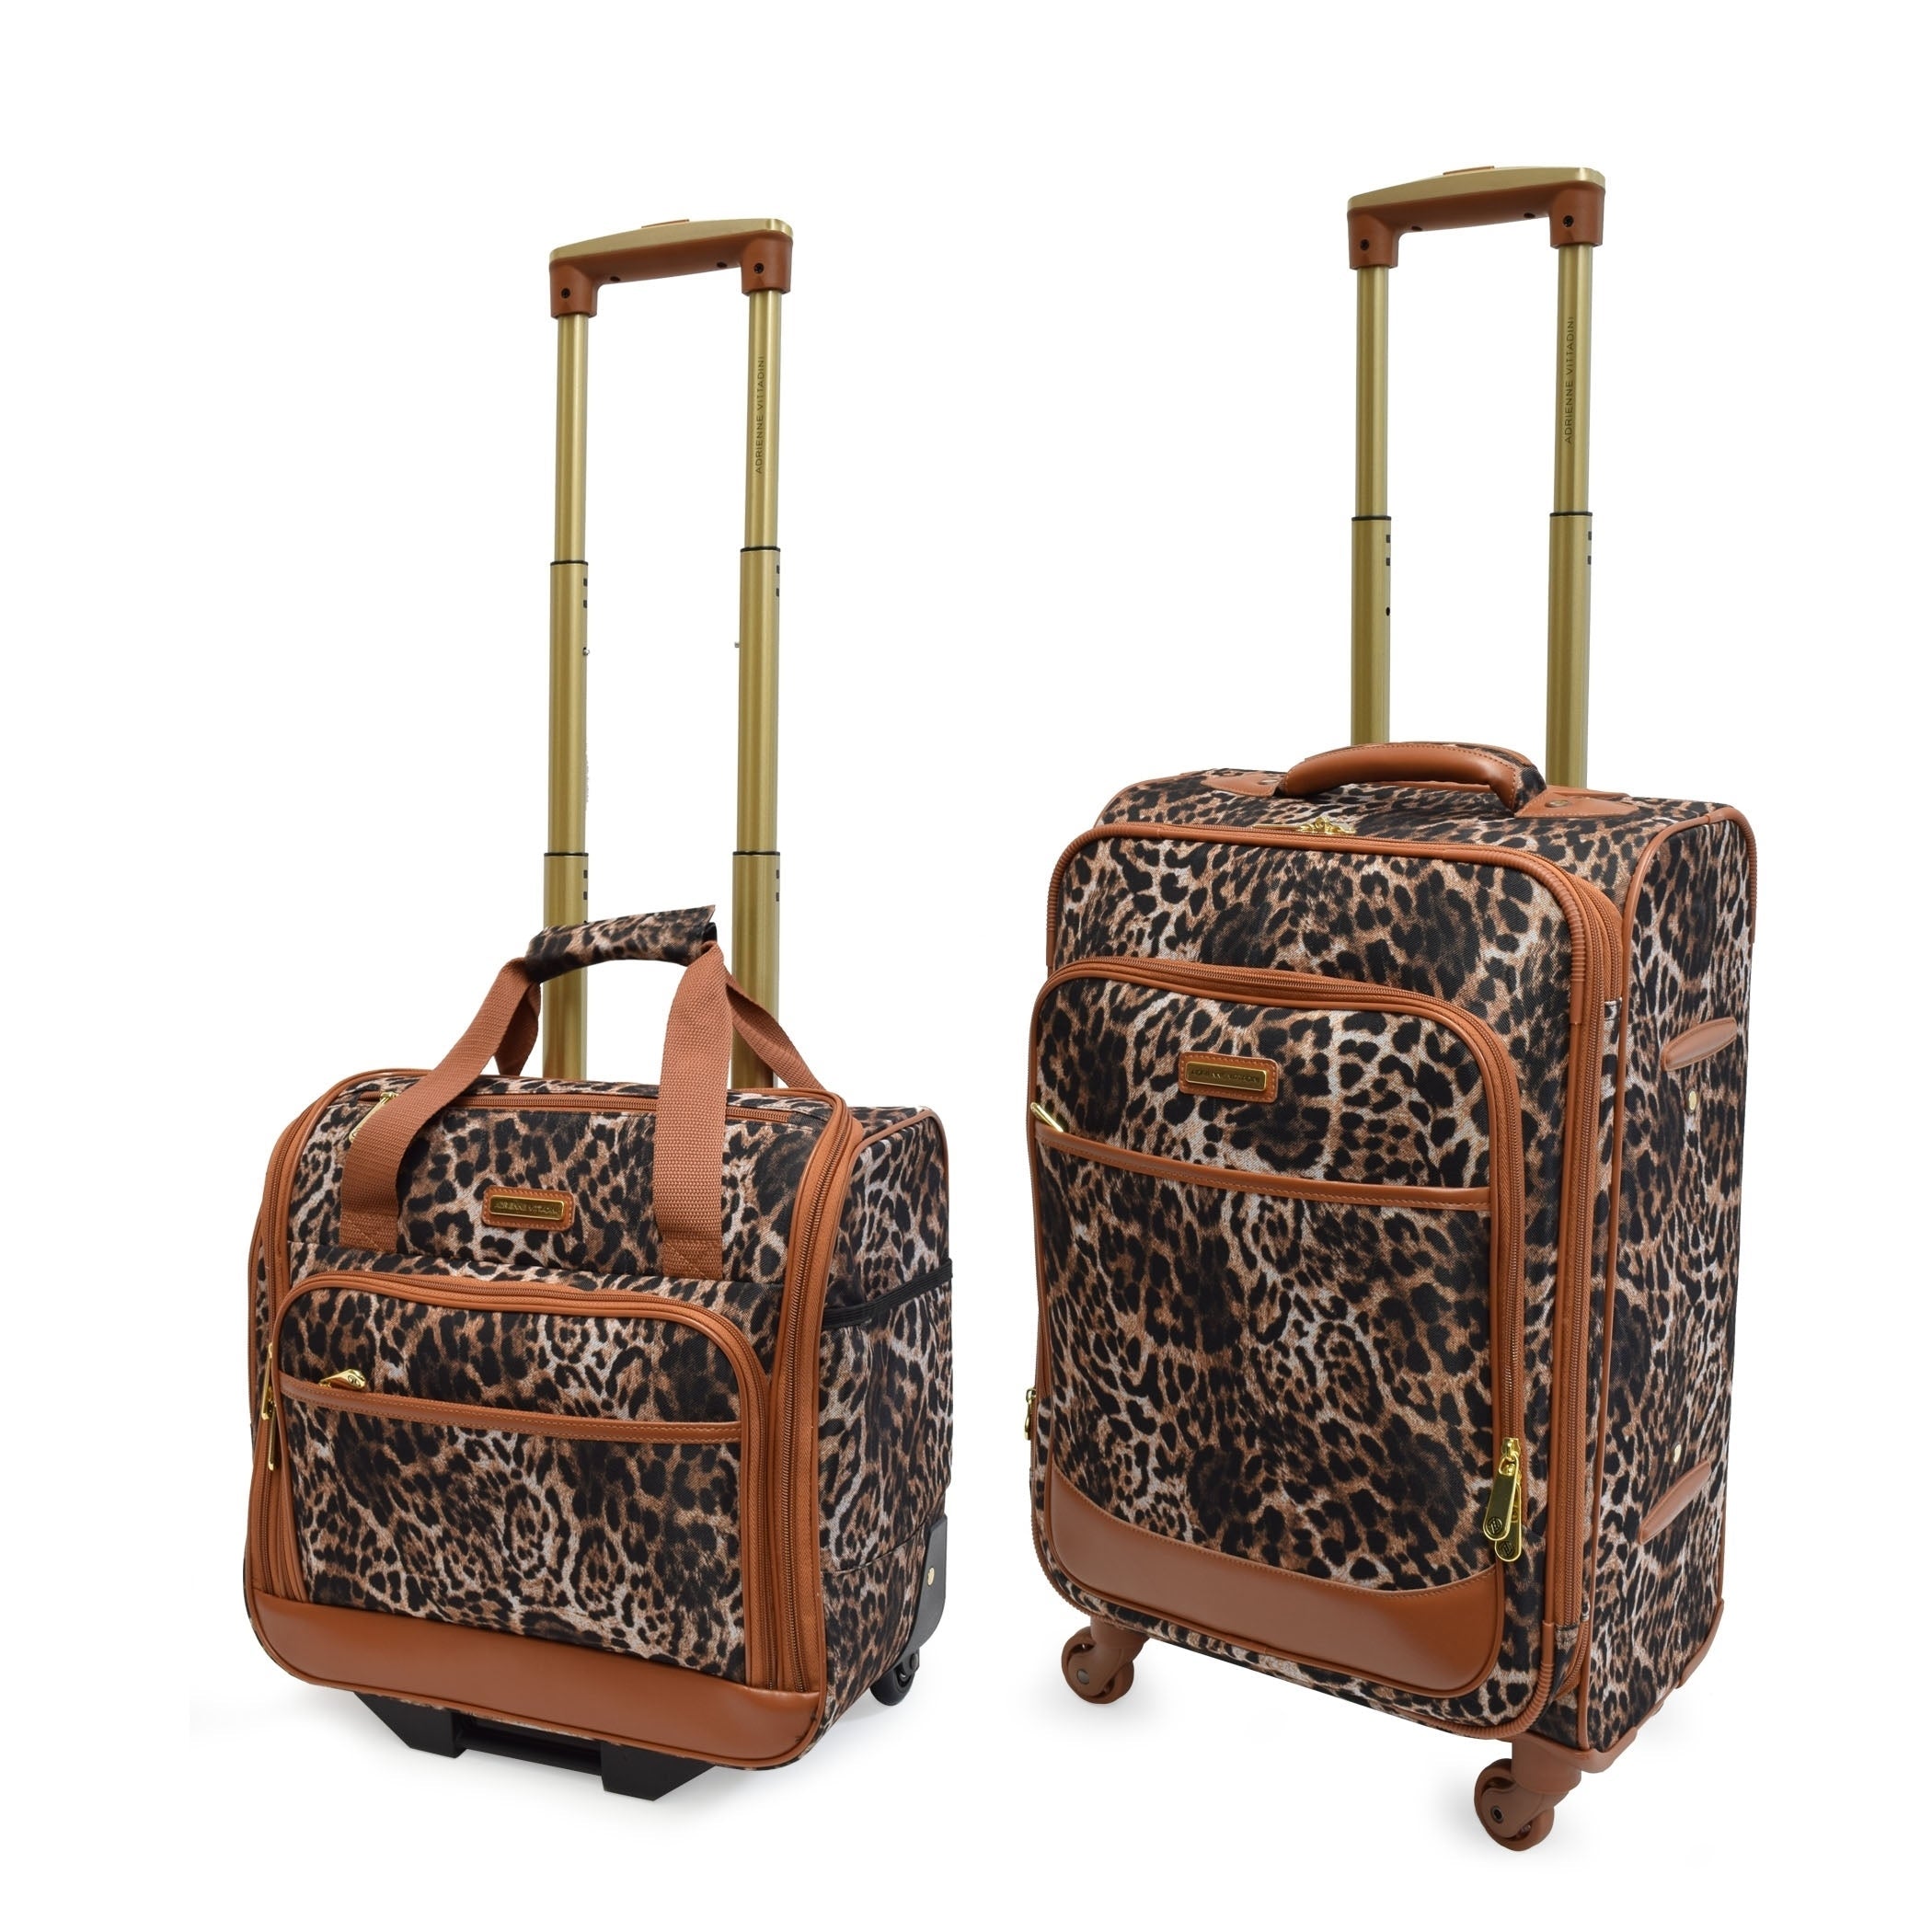 Black Leopard 21 Spinner Carry-On Luggage | Fashion Luggage